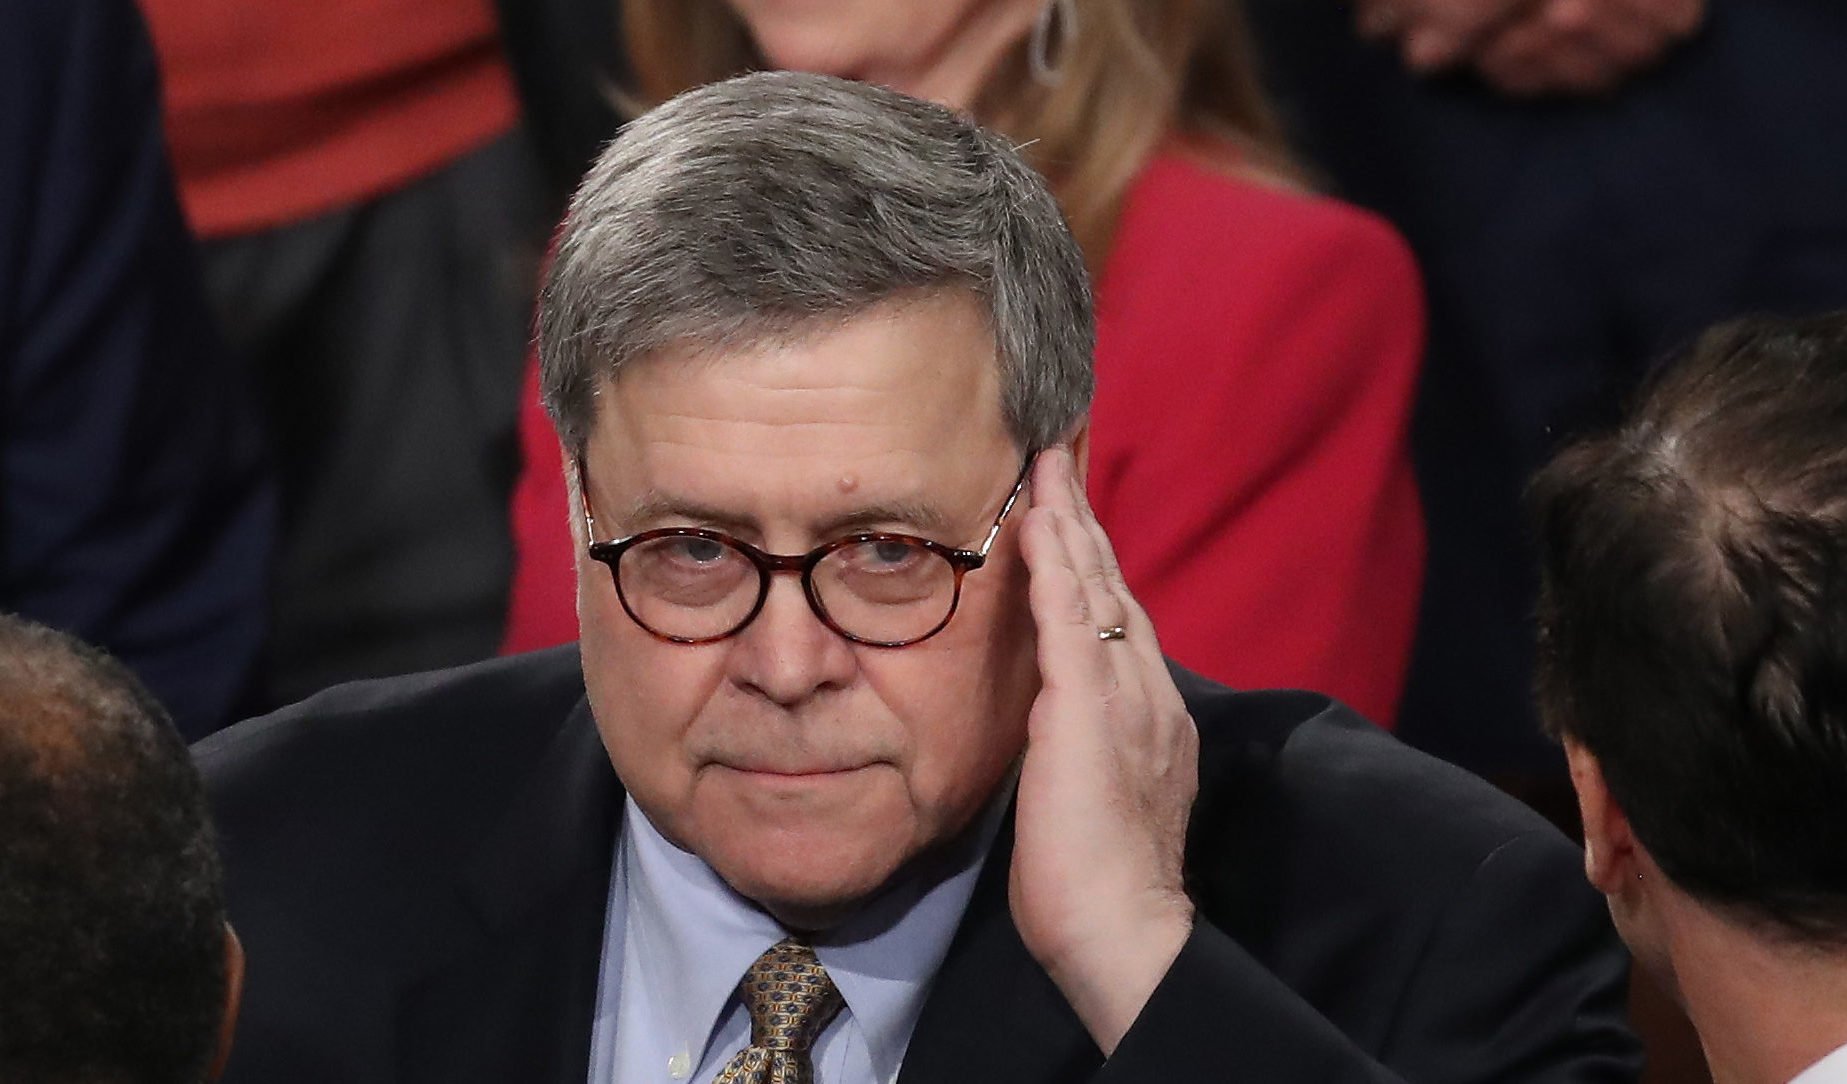 Attorney General William Barr arrives at the State of the Union address in the chamber of the U.S. House of Representatives on Feb. 4, 2020 in Washington, D.C. (Photo by Drew Angerer/Getty Images)